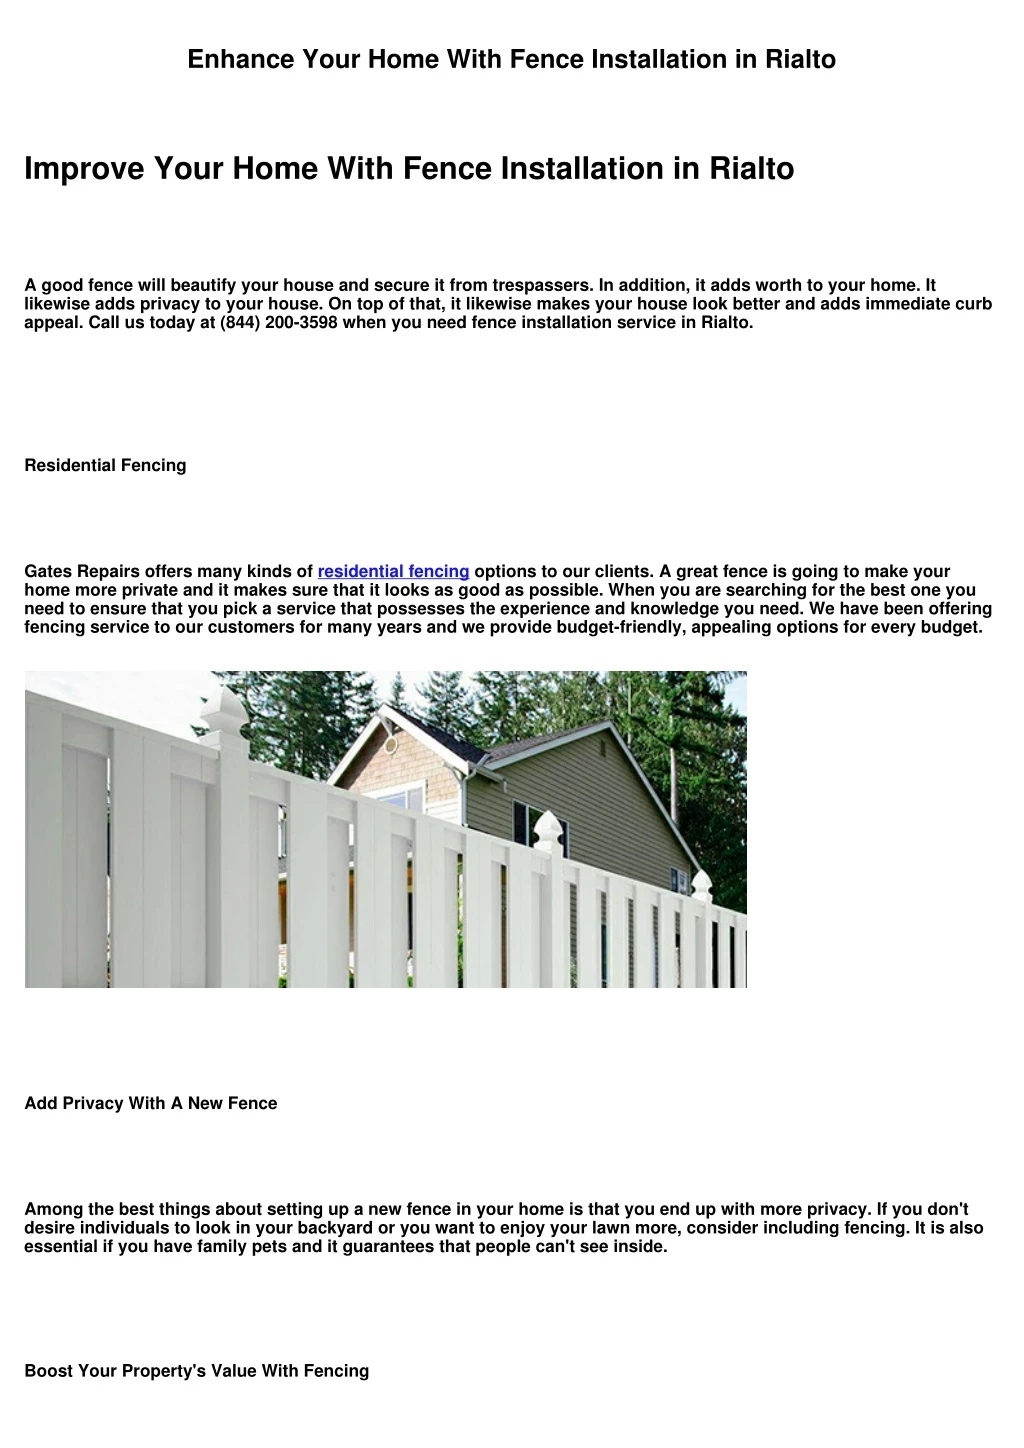 enhance your home with fence installation